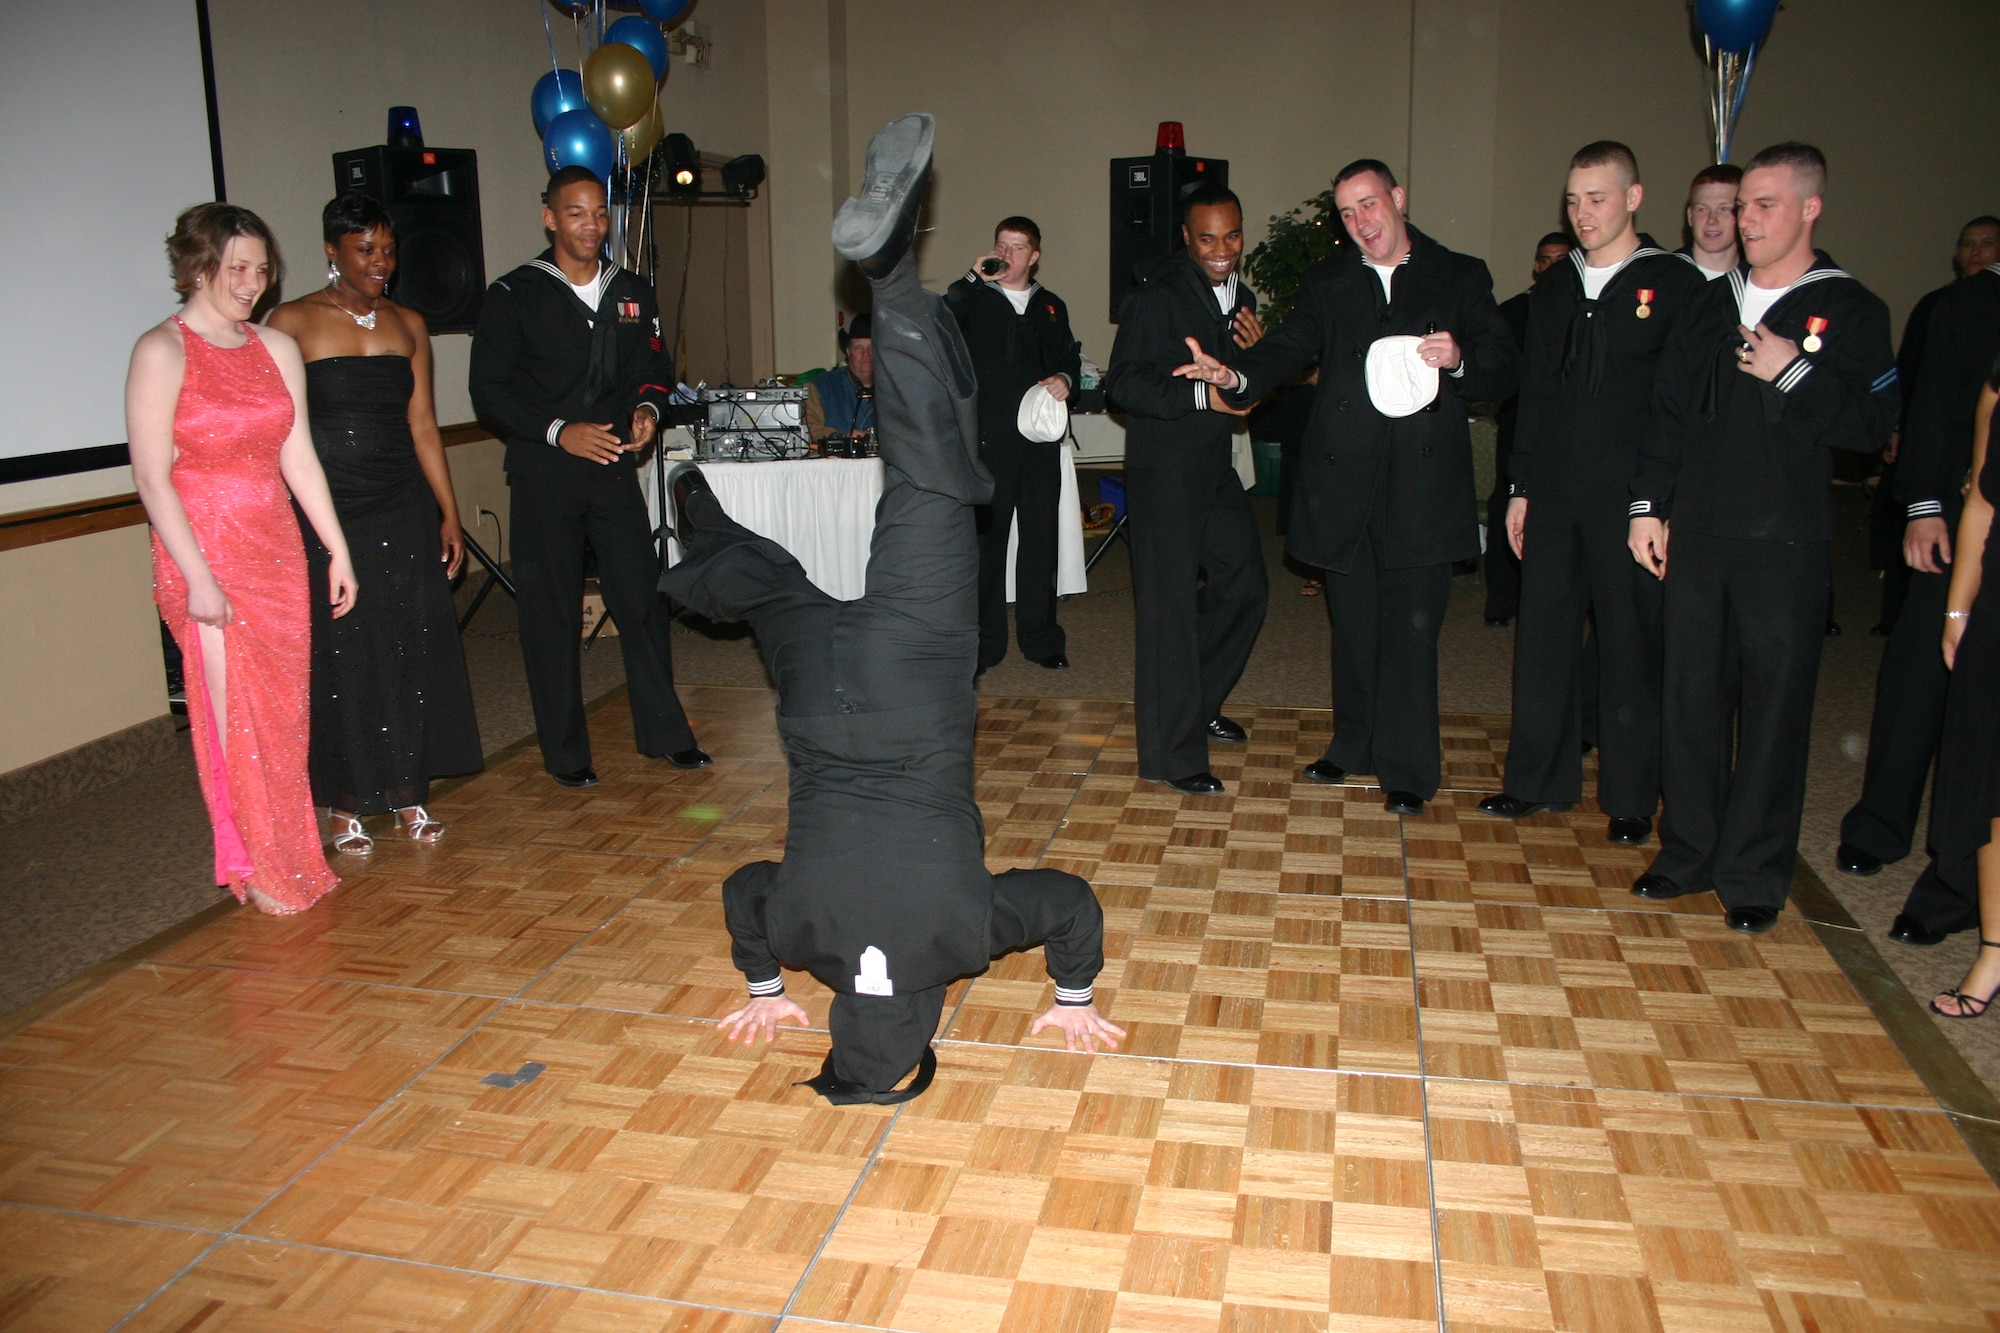 Seaman David Seek performs a headspin during the Seabee Ball at the Howard Johnson Plaza Hotel March 3. (U.S. Air Force photo/Staff Sgt. Tonnette Thompson)